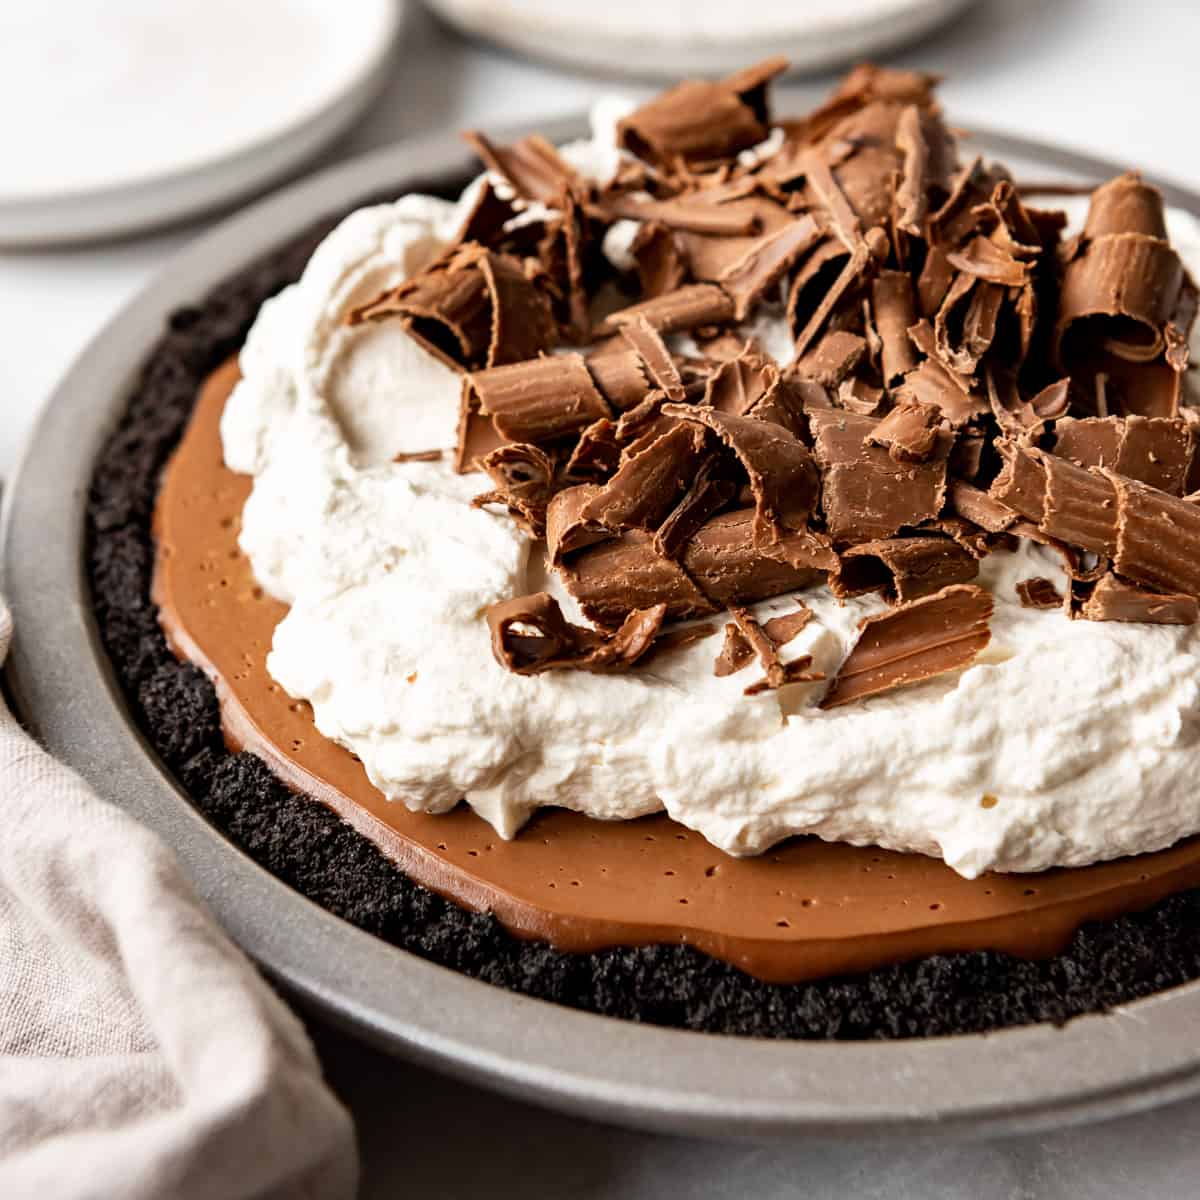 A homemade chocolate cream pie in a metal pan topped with whipped cream and chocolate curls.